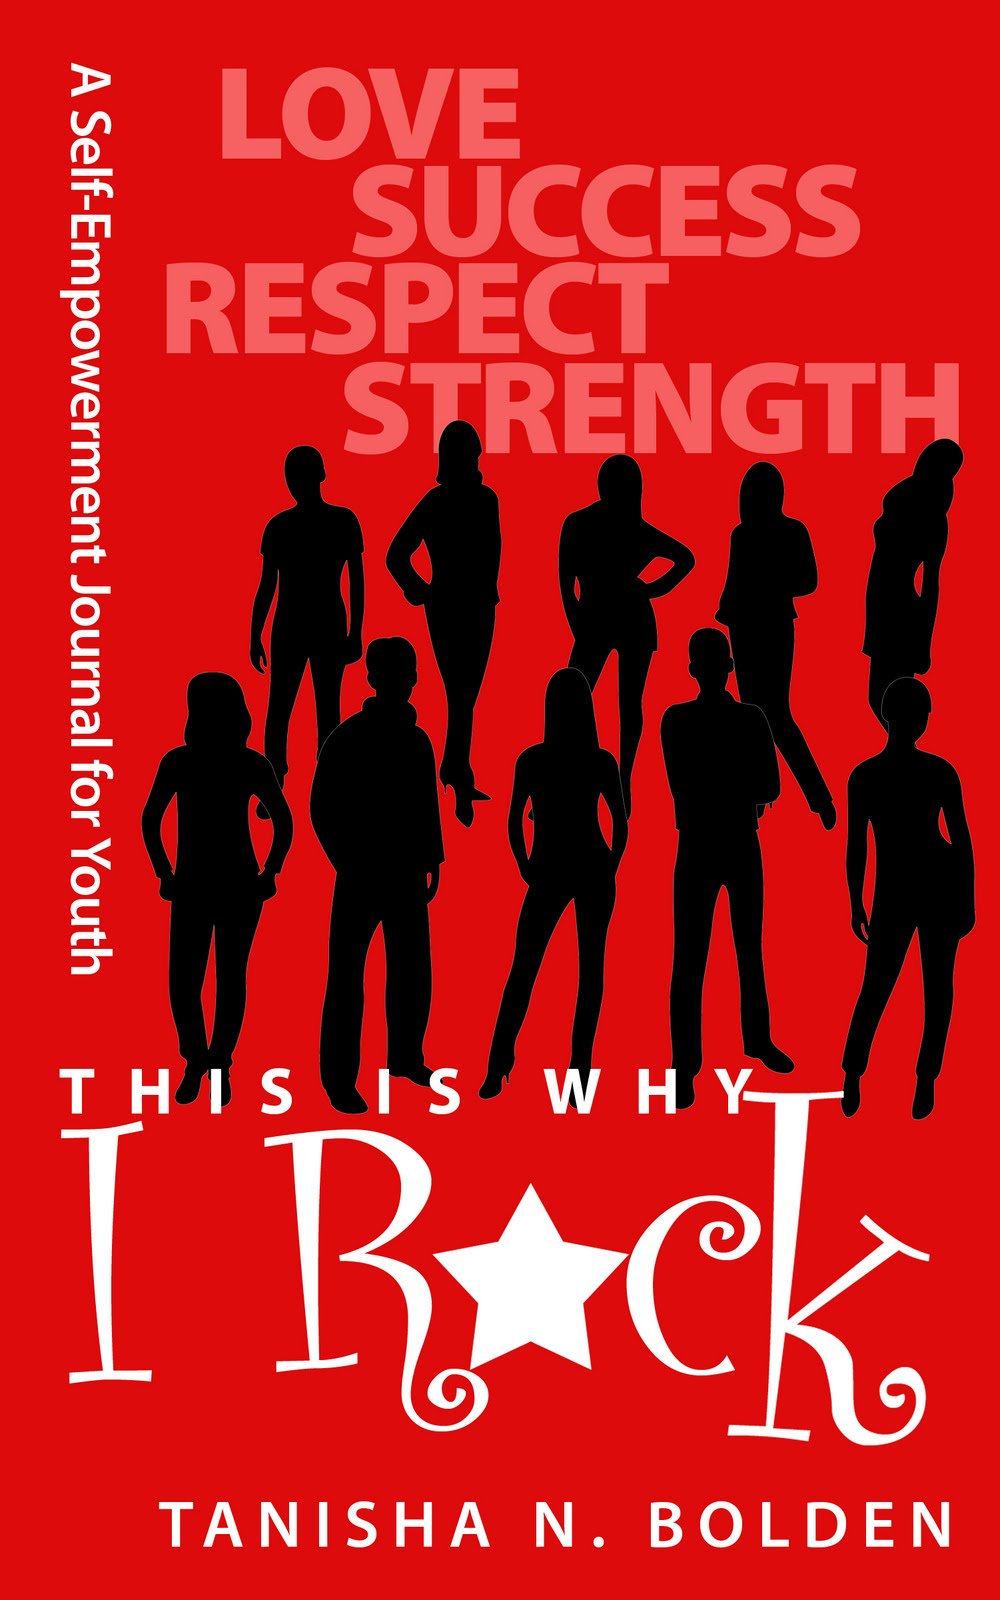 This Is Why I ROCK by Tanisha N. Bolden